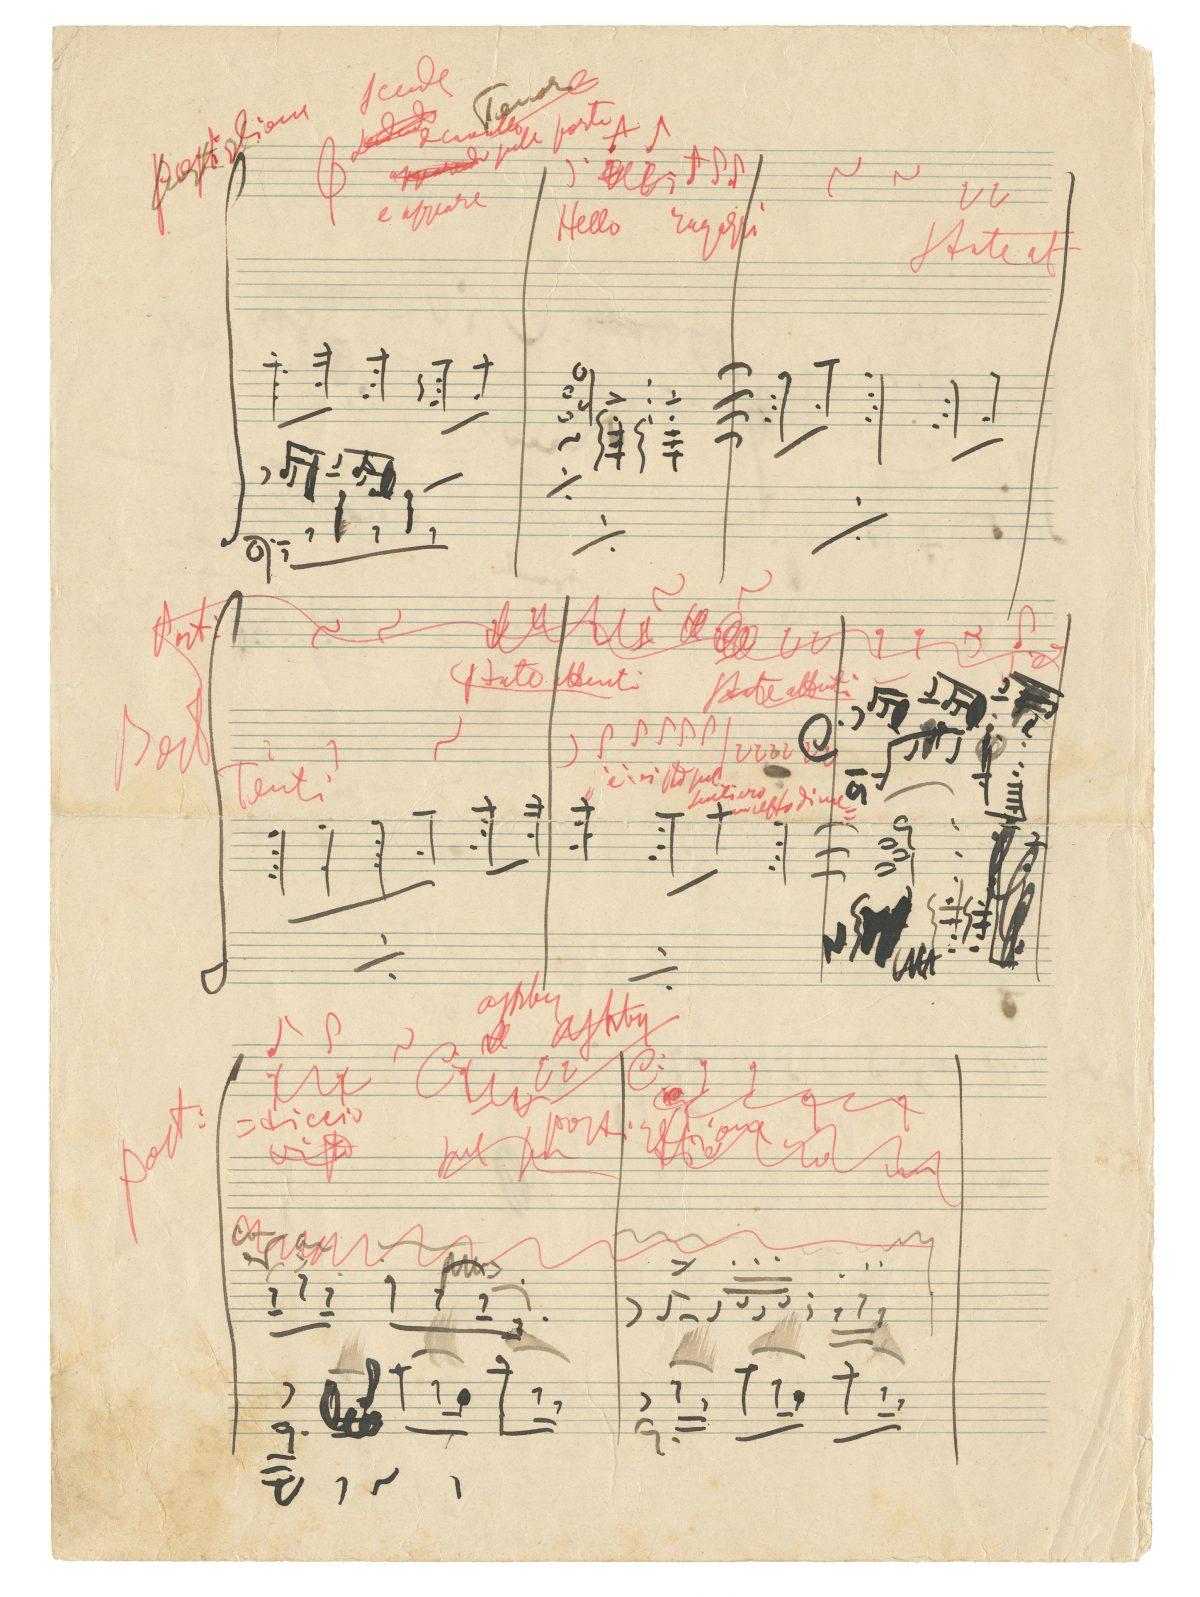 Draft of part of Act 1 of “The Girl of the Golden West (La fanciulla del West),” circa 1908, by Giacomo Puccini. Autographed manuscript, 14¾ inches by 10¾ inches. (Taschen)